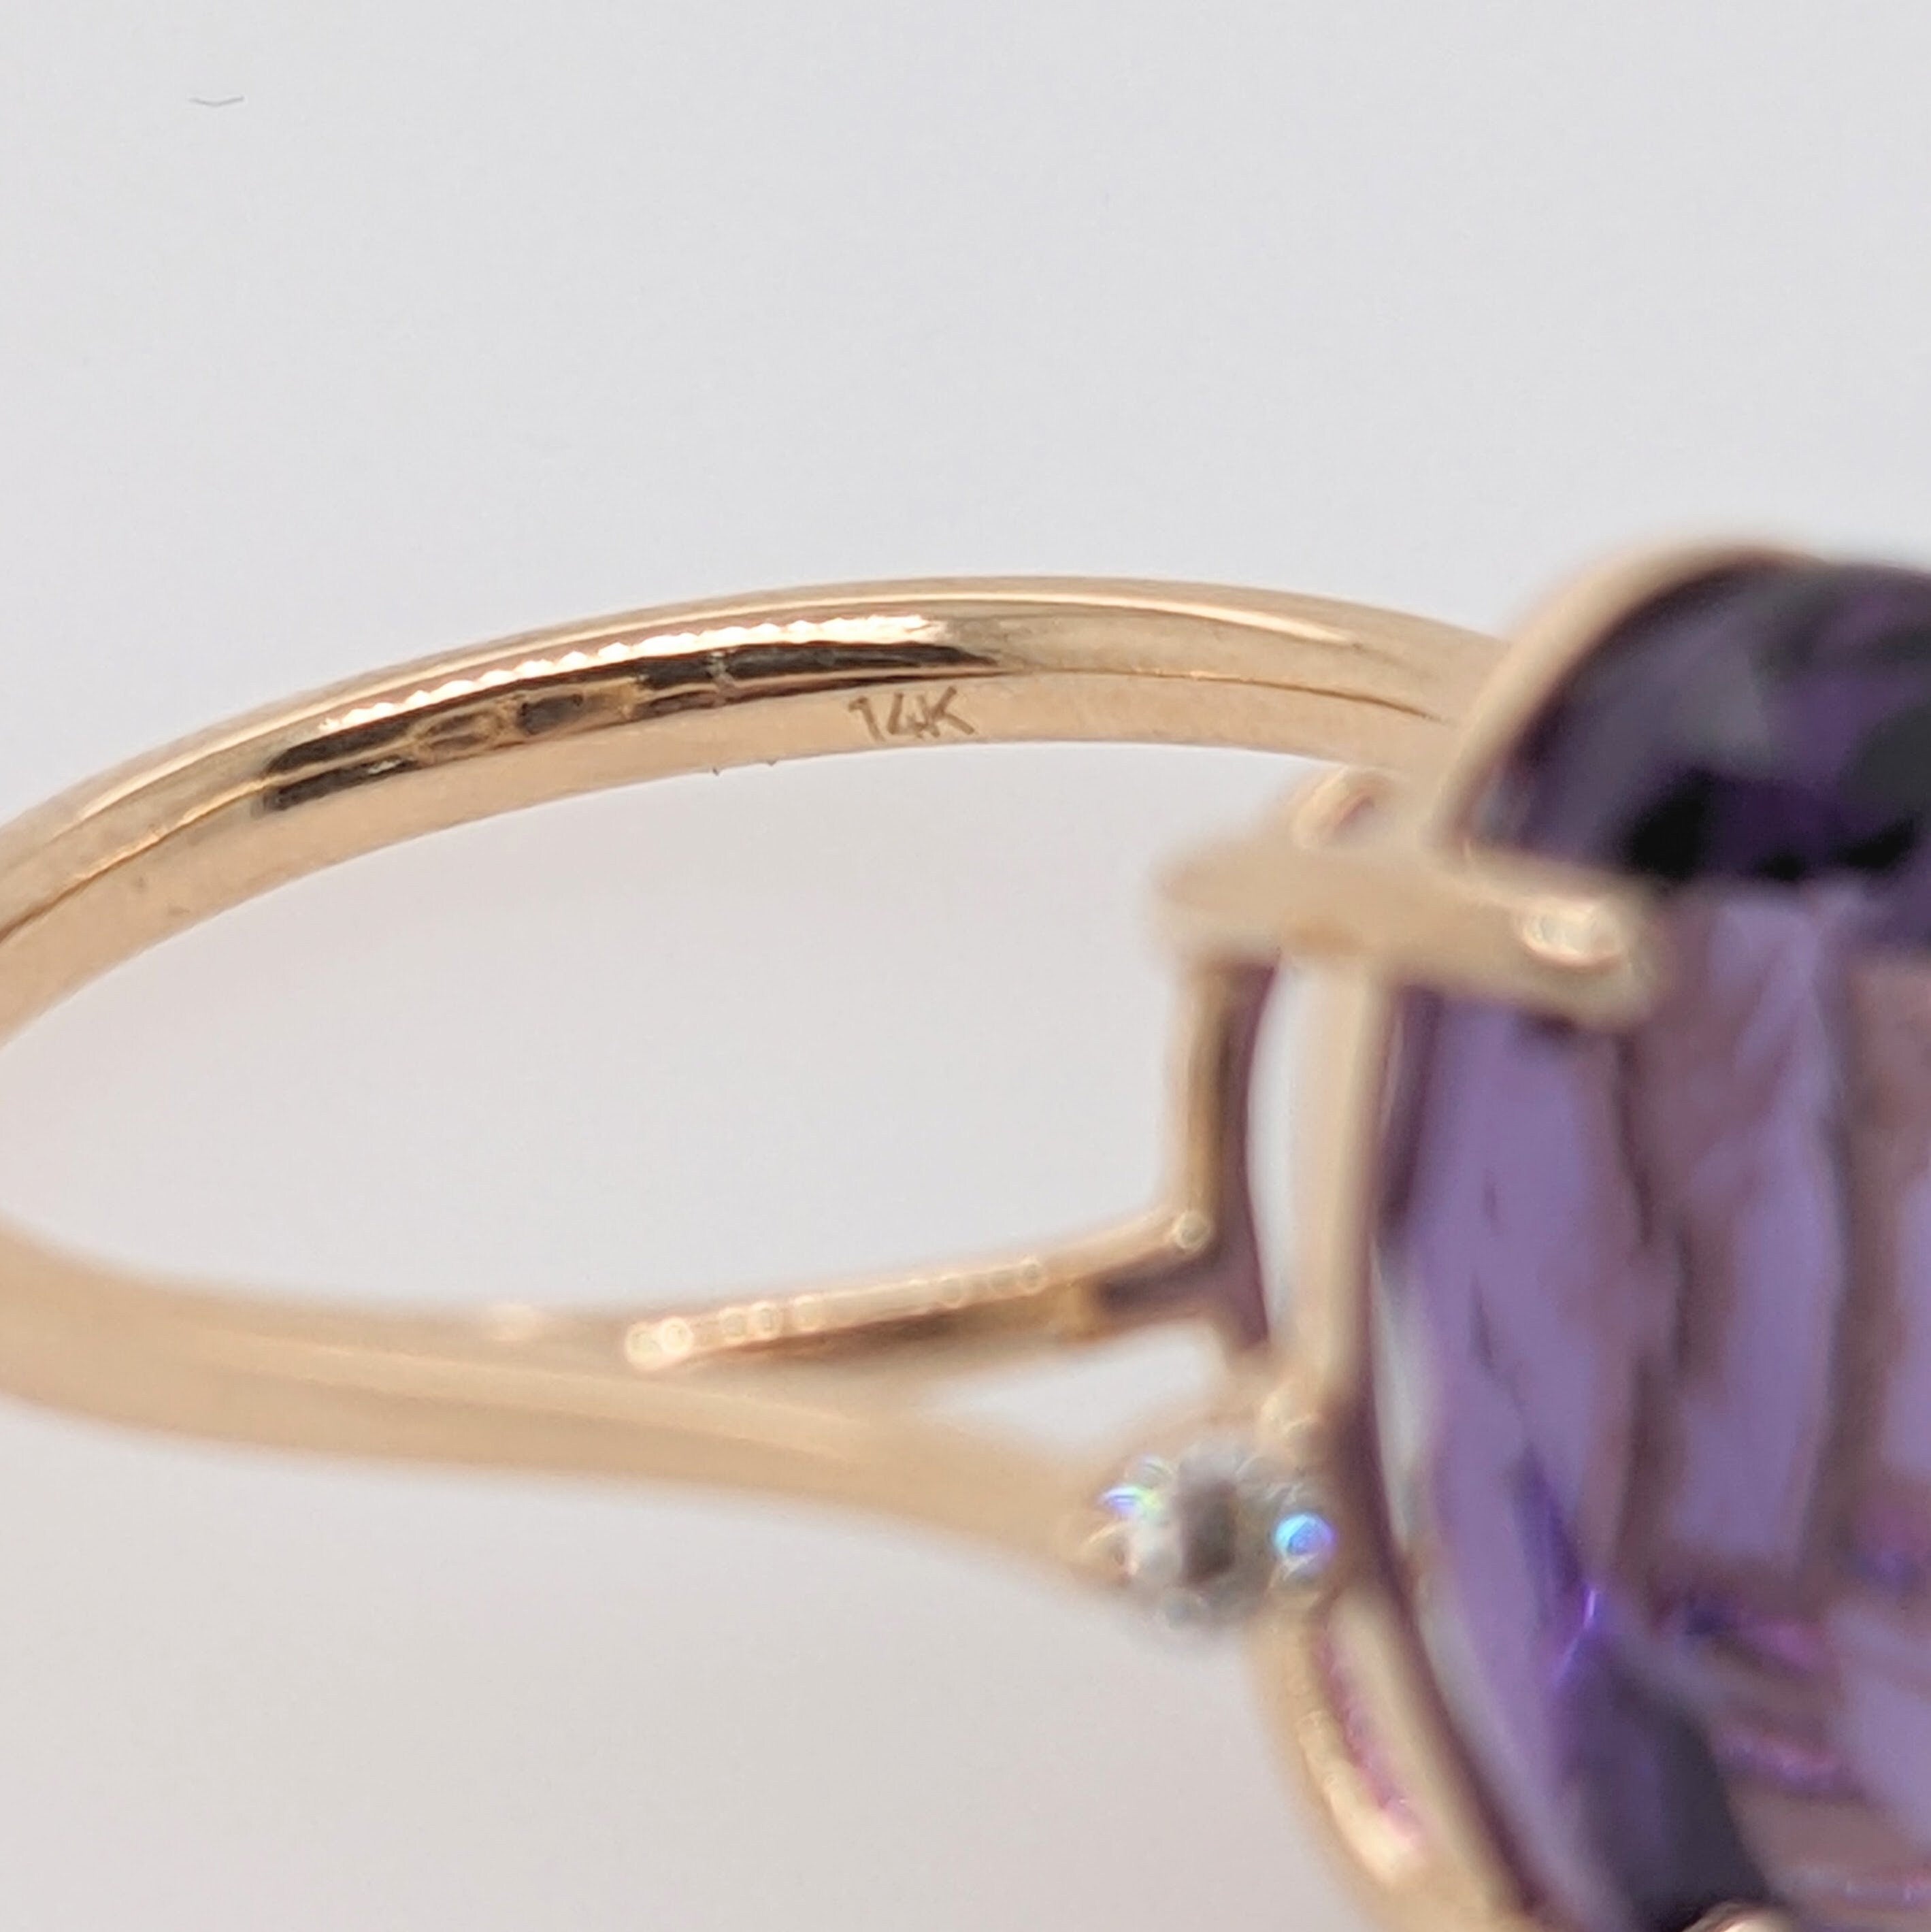 Deep Purple Amethyst in Solid 14k Yellow Gold w Natural Diamond Accents | Oval Cut 14x10 | Prong Set | February Birthday | Statement Ring